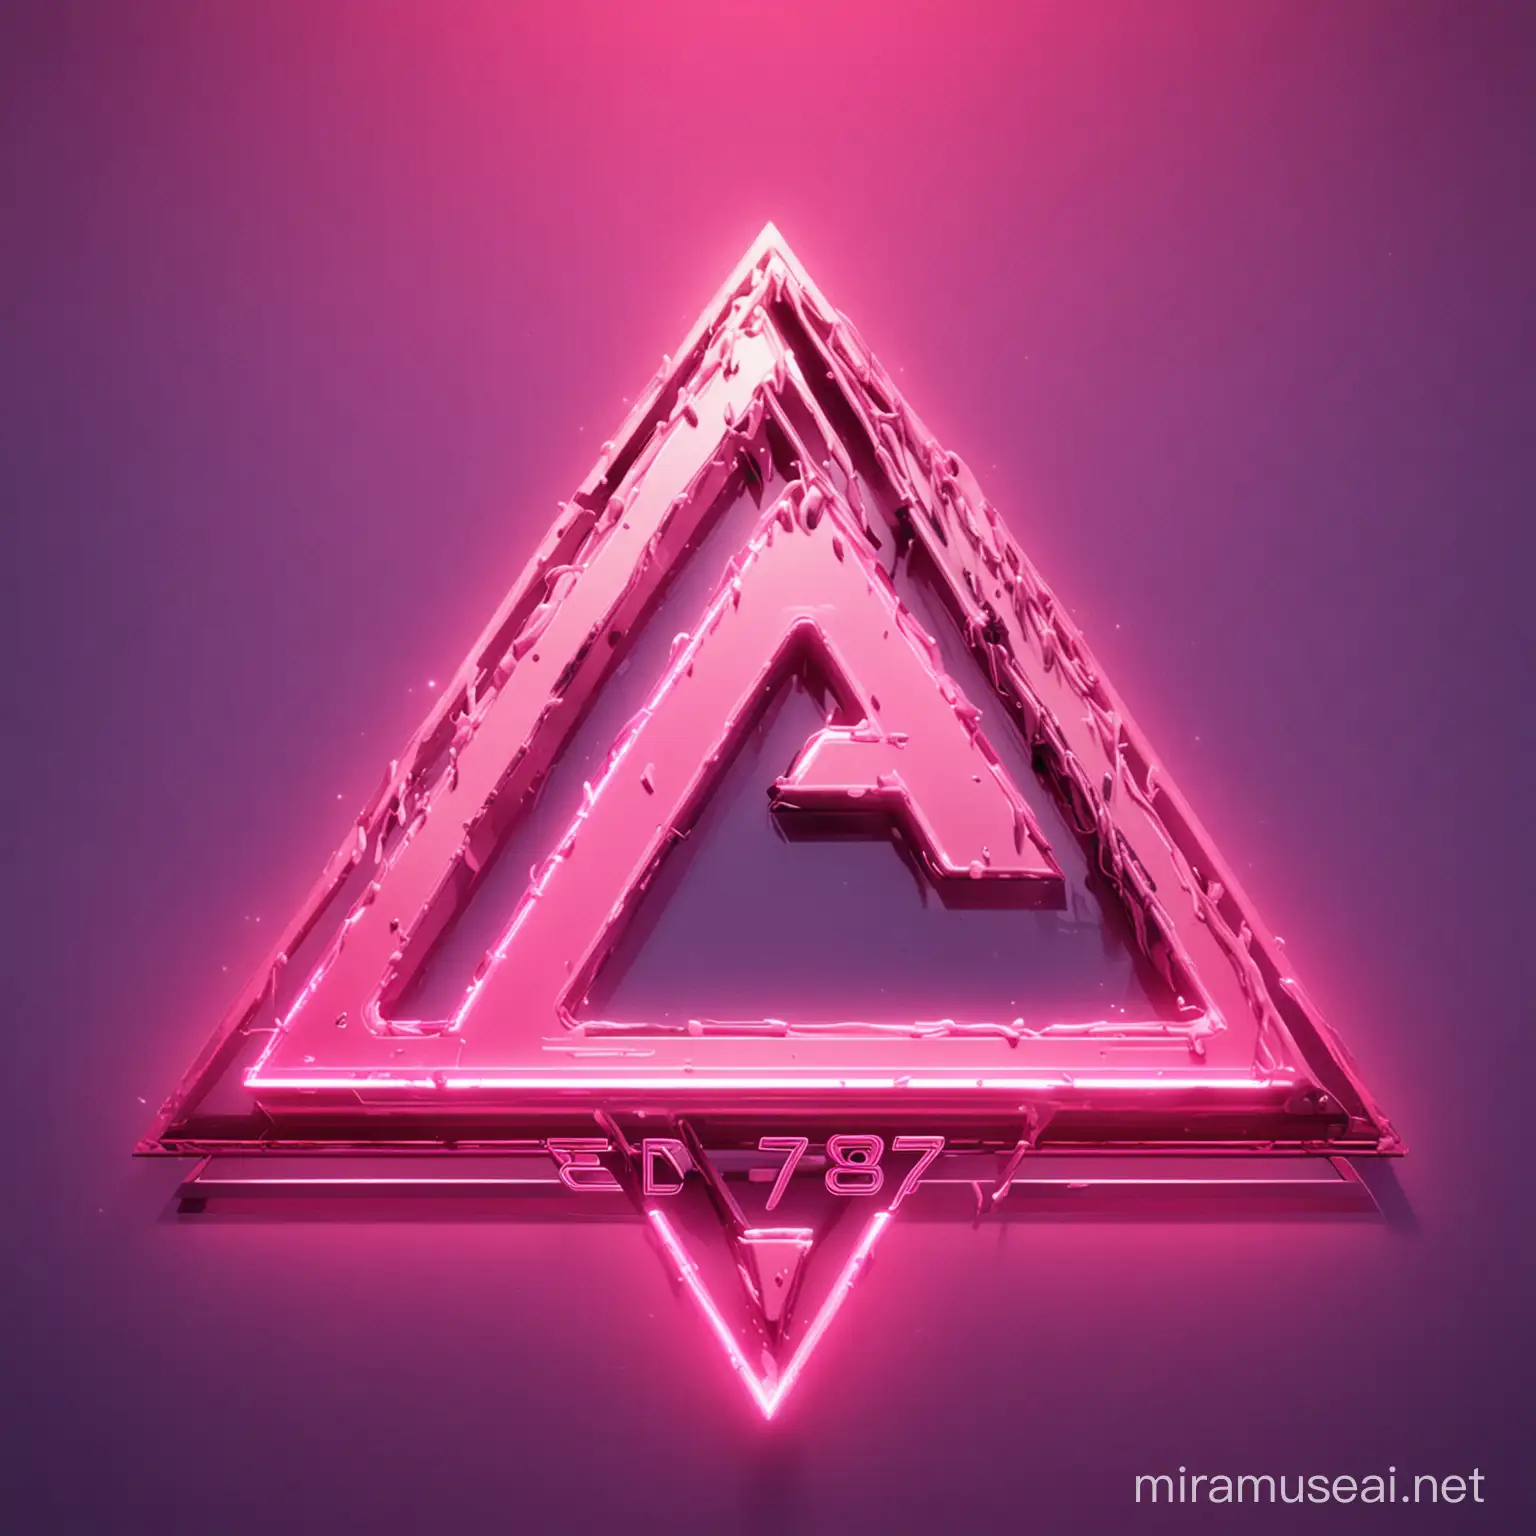 Vaporwave Synthwave Band Logo ED87 in Pink Neon Lights and Chrome Letters